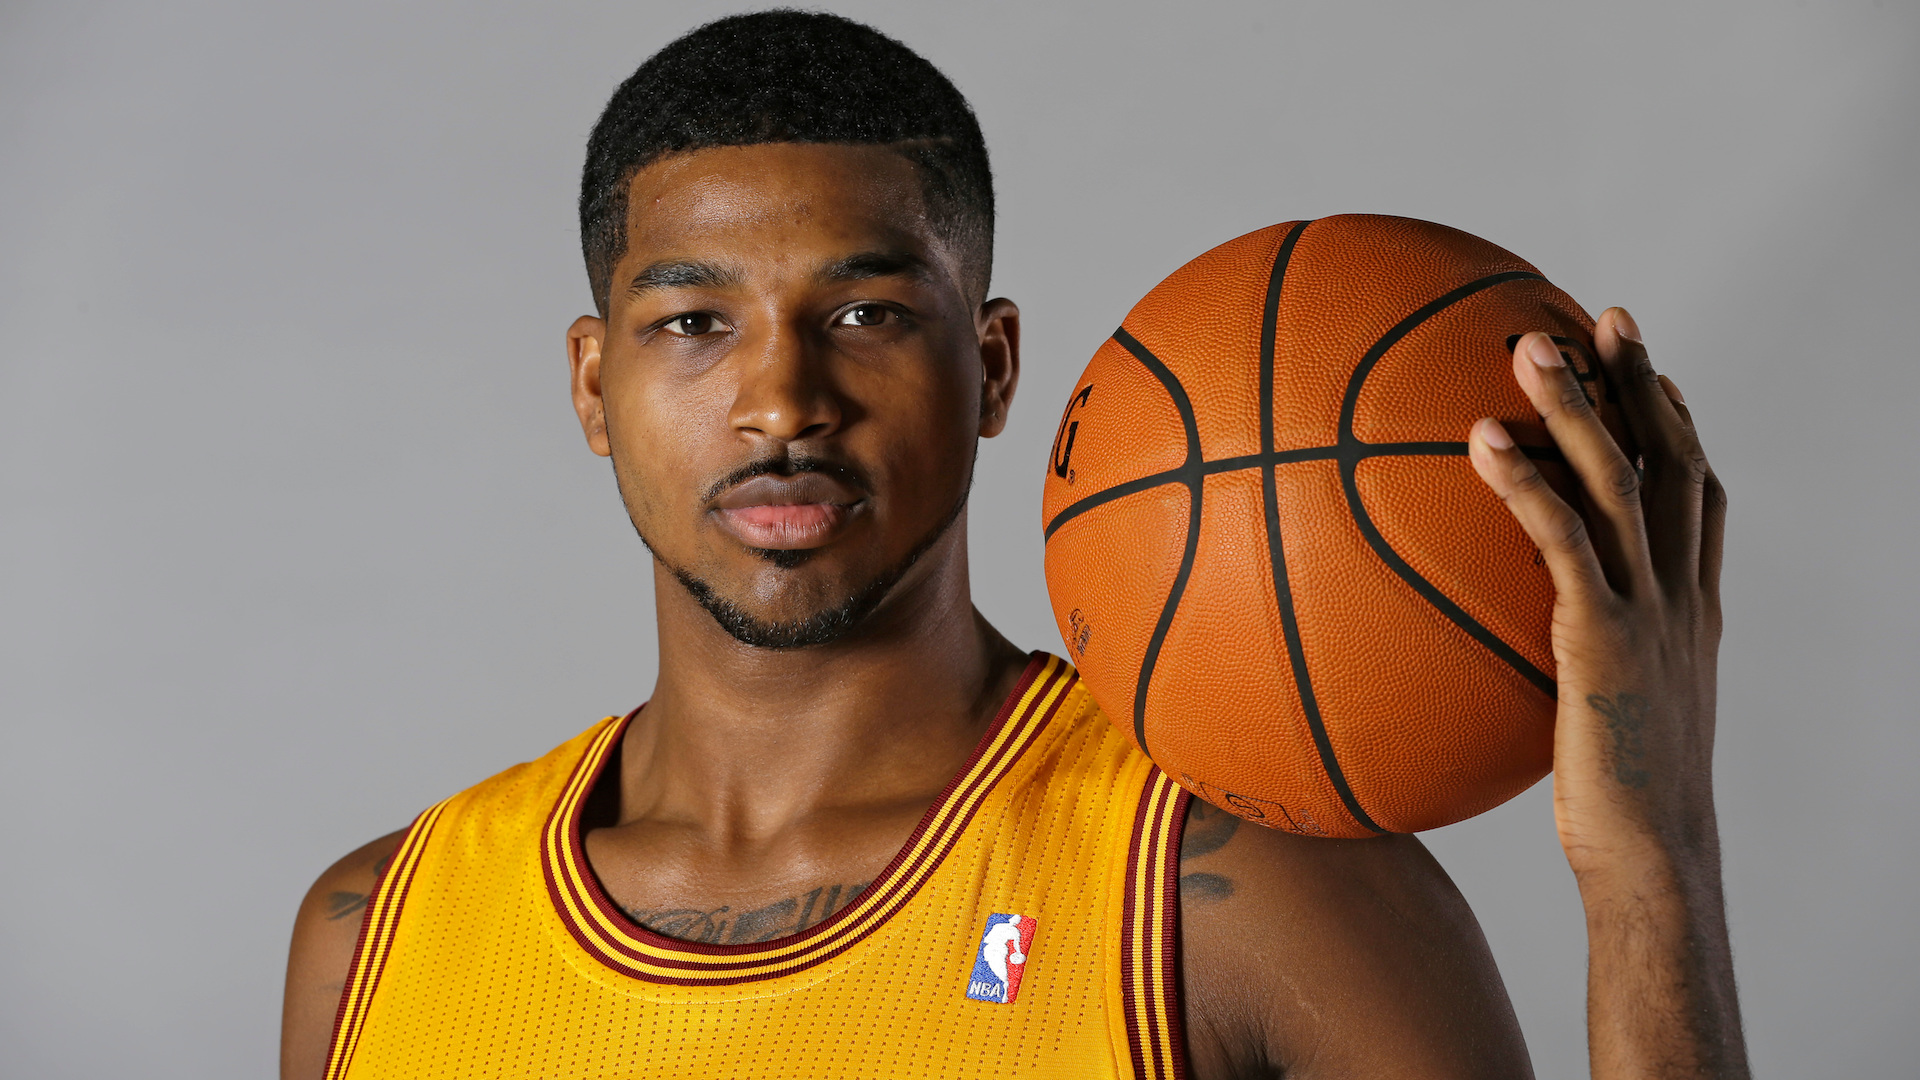 What is Tristan Thompson's net worth?